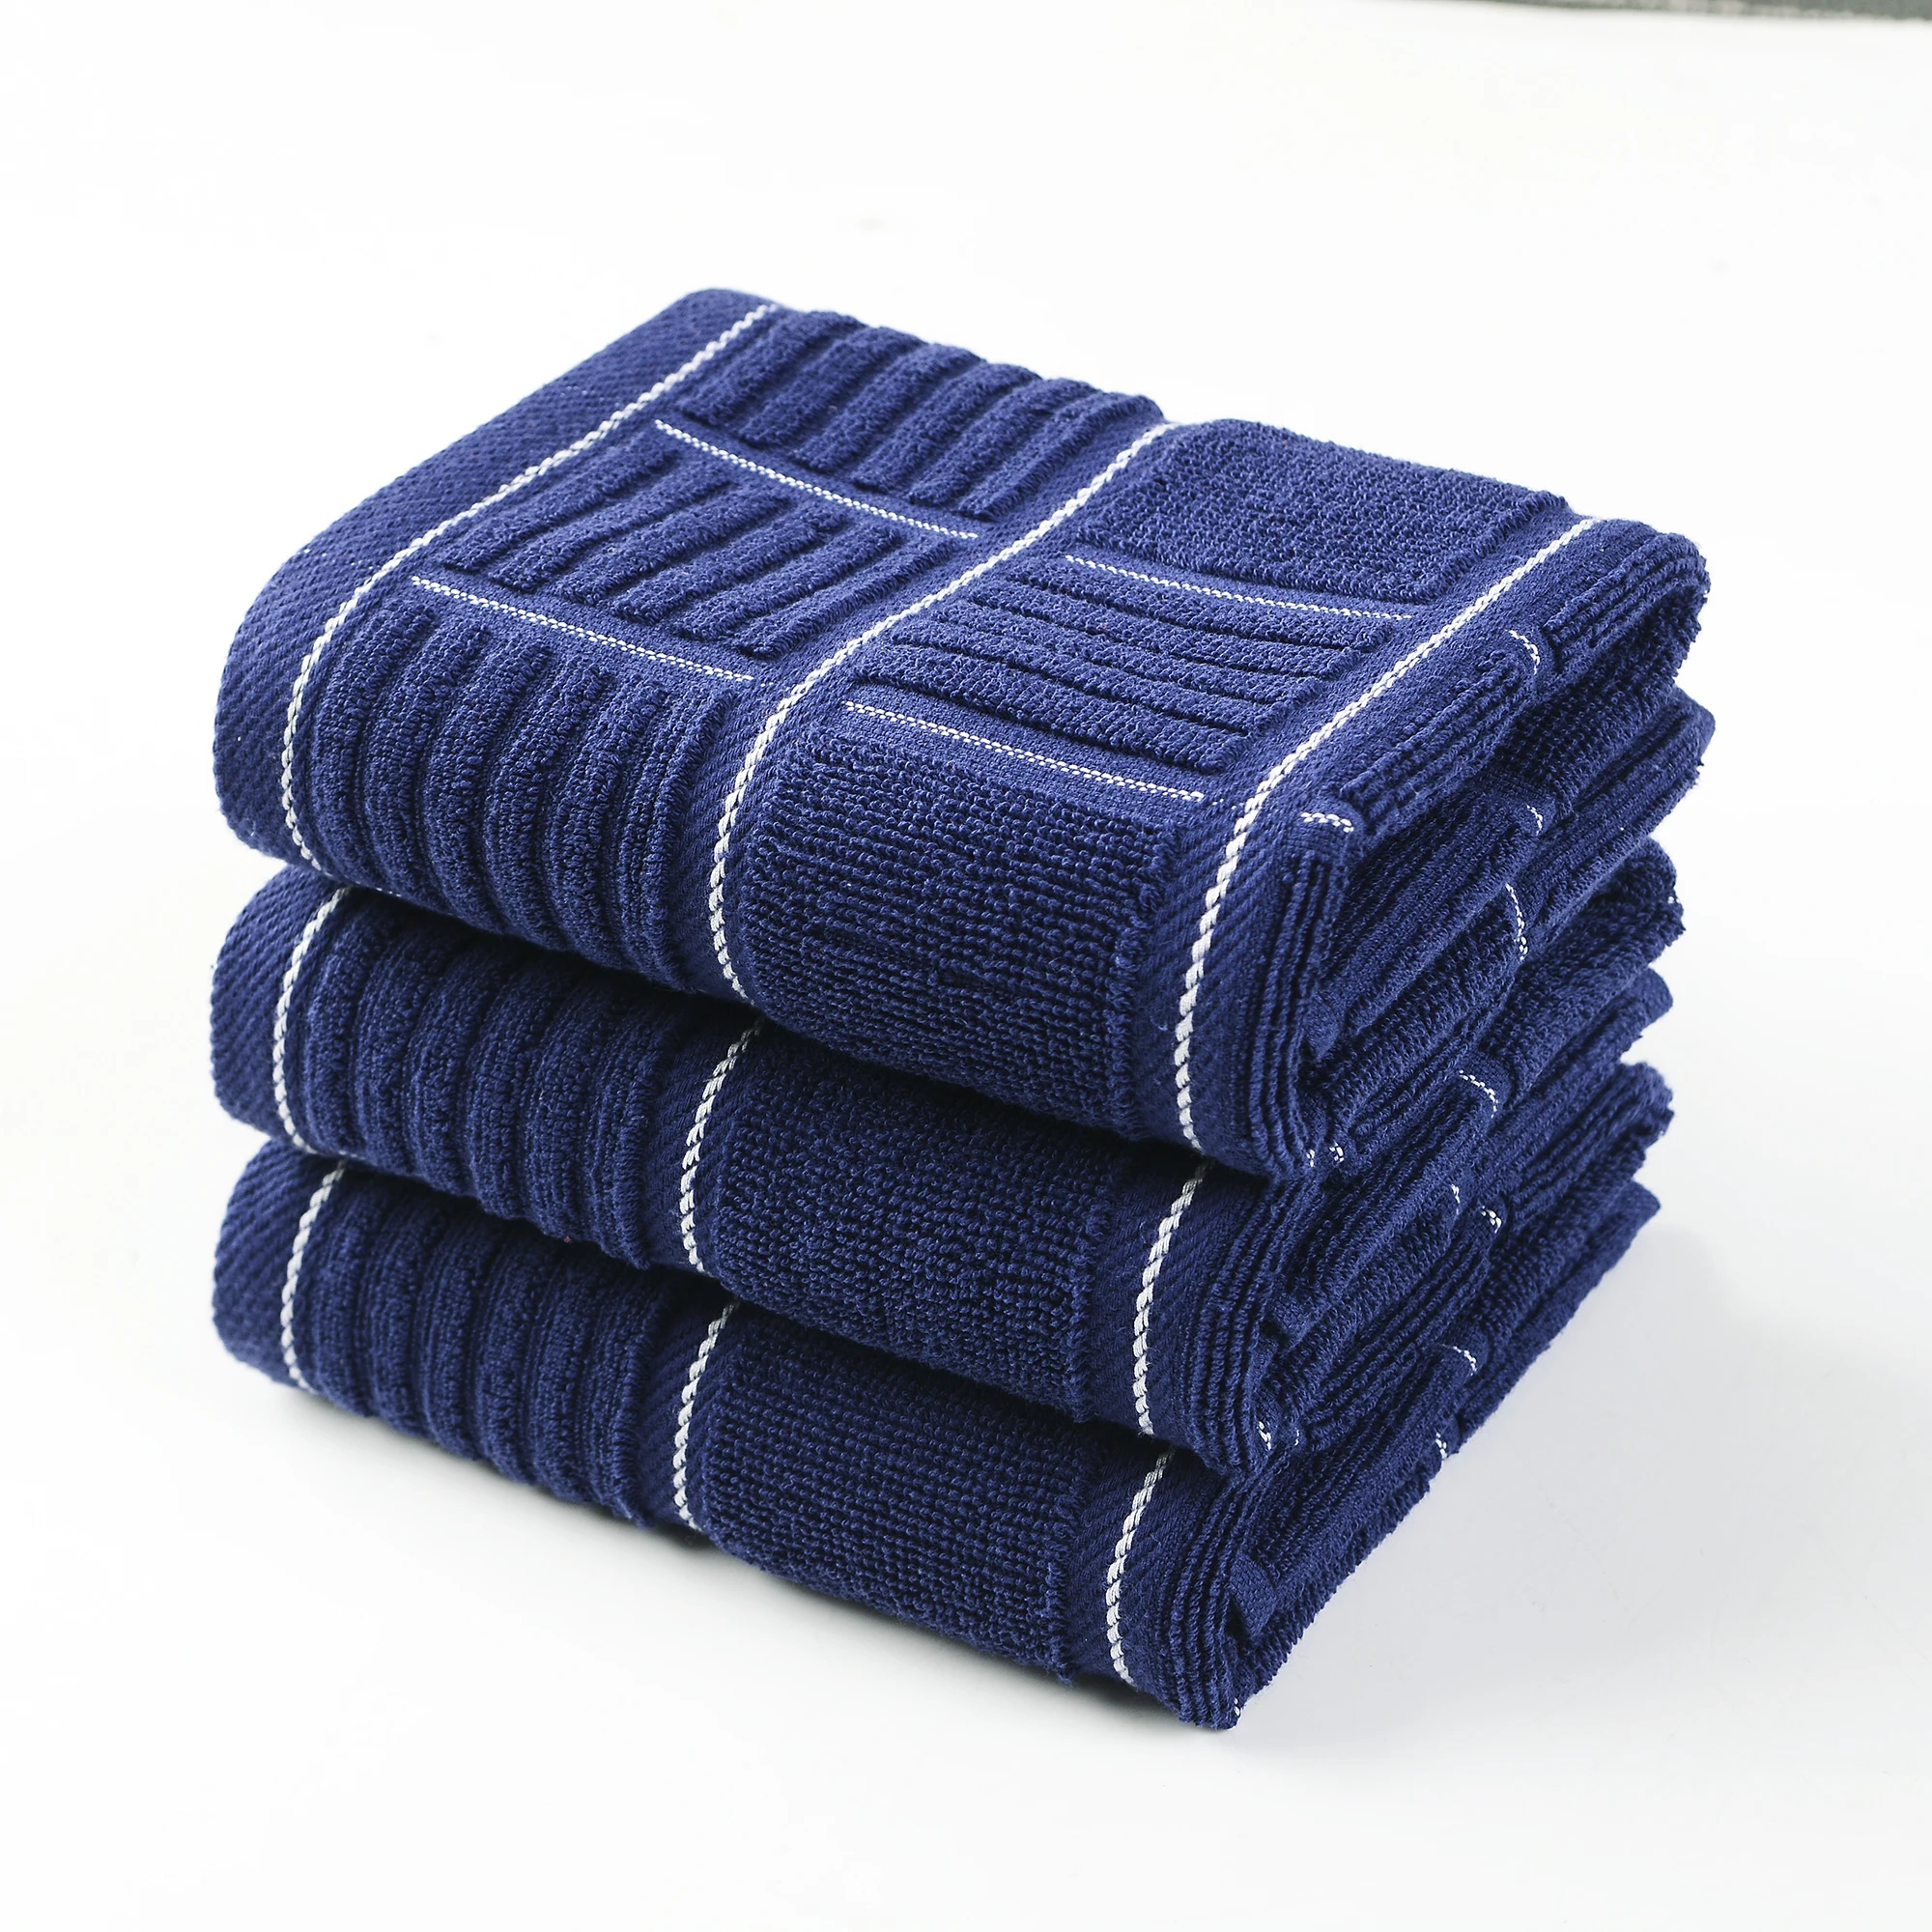 Oeleky Kitchen Towels Cotton With High Absorbent, Thick Dish